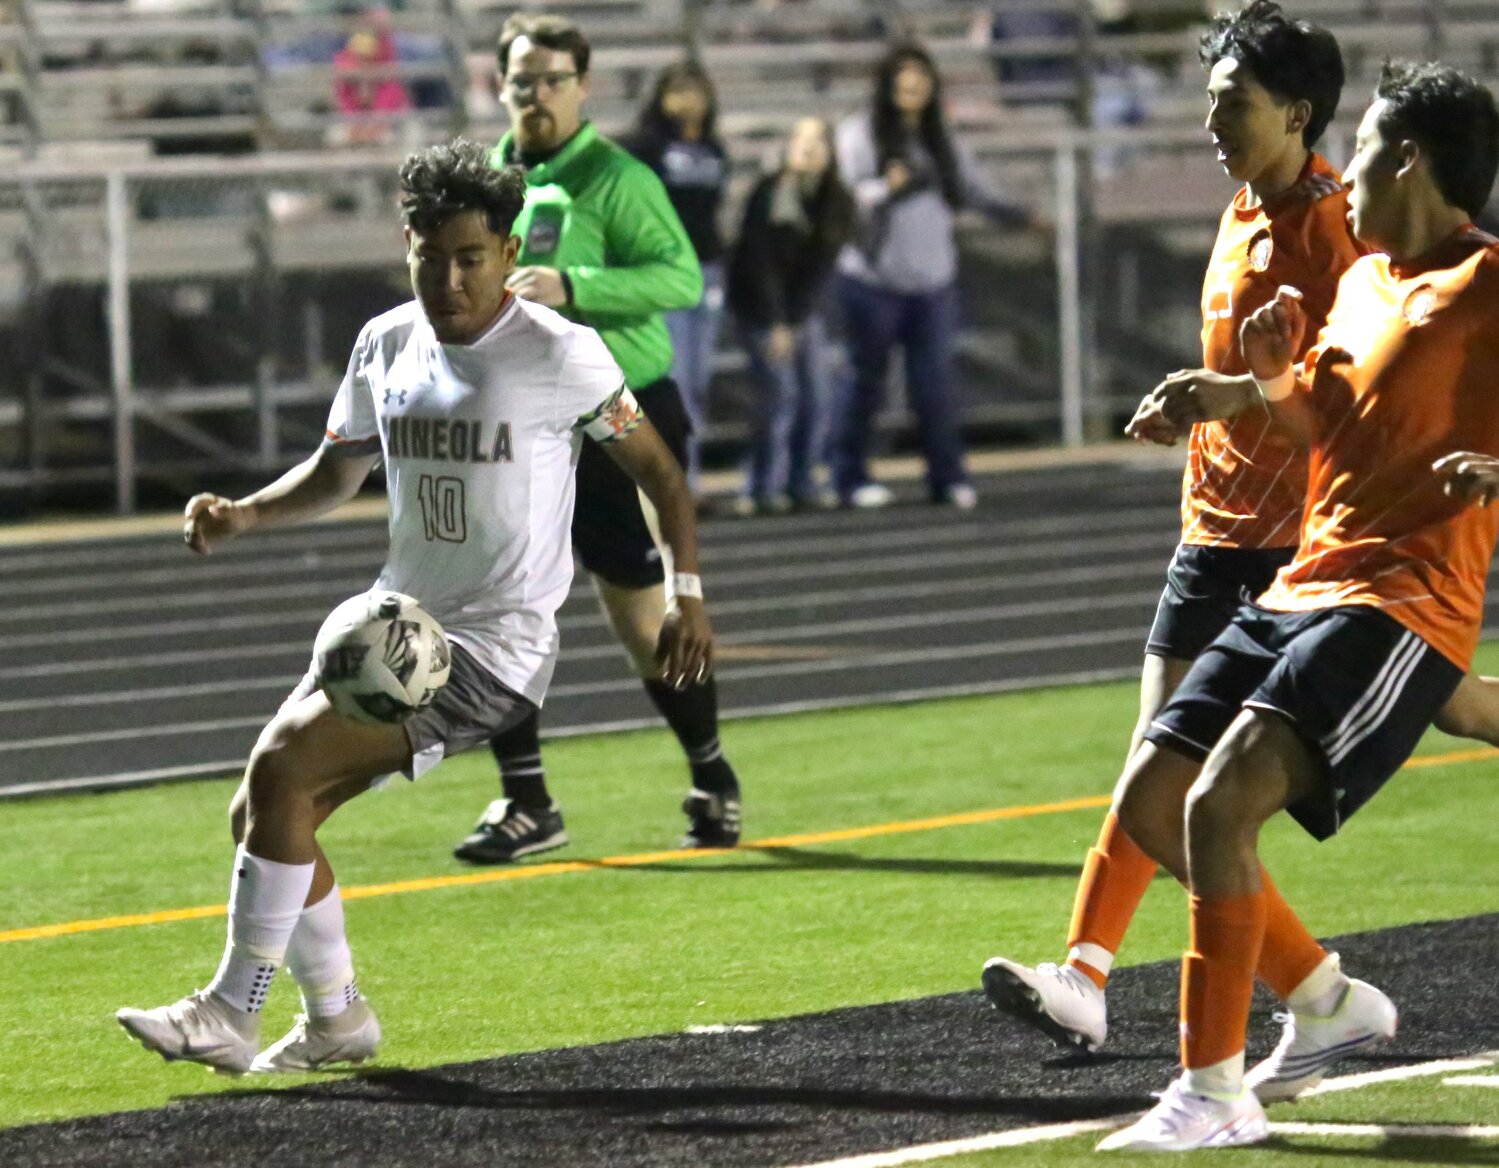 Jonathan Ledesma moments before he cuts between the defenders to set-up his first goal of the game. He tallied both of Mineola’s goals in a win at Grand Saline last Tuesday.